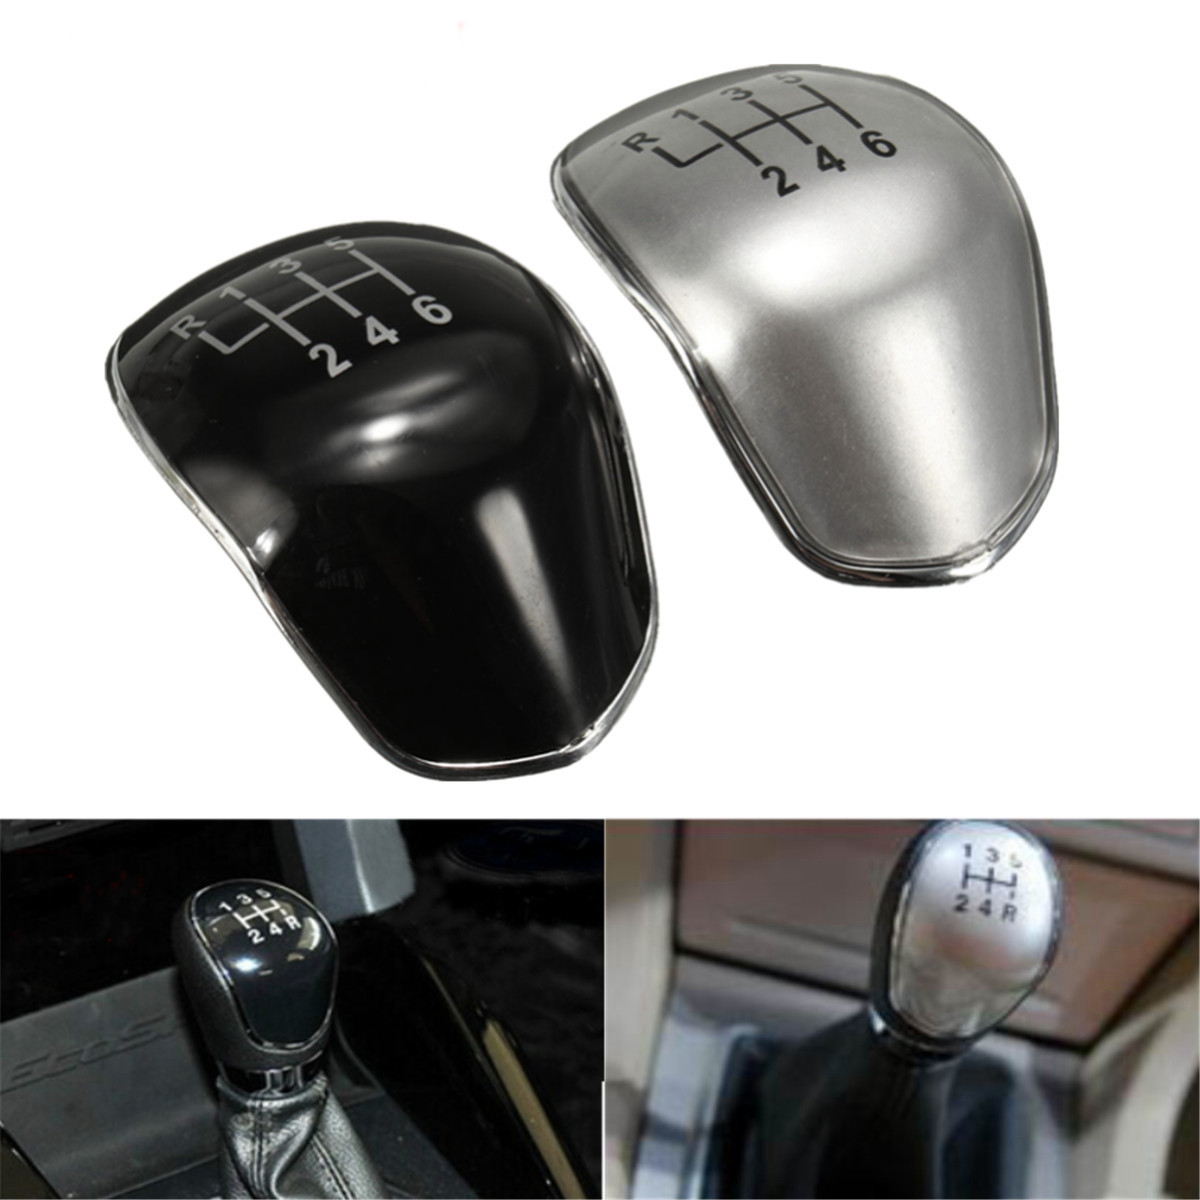 6 Speed Gear Shift Knob Cap Cover for Ford Focus Fiesta Replacement Black Chrome - Auto GoShop